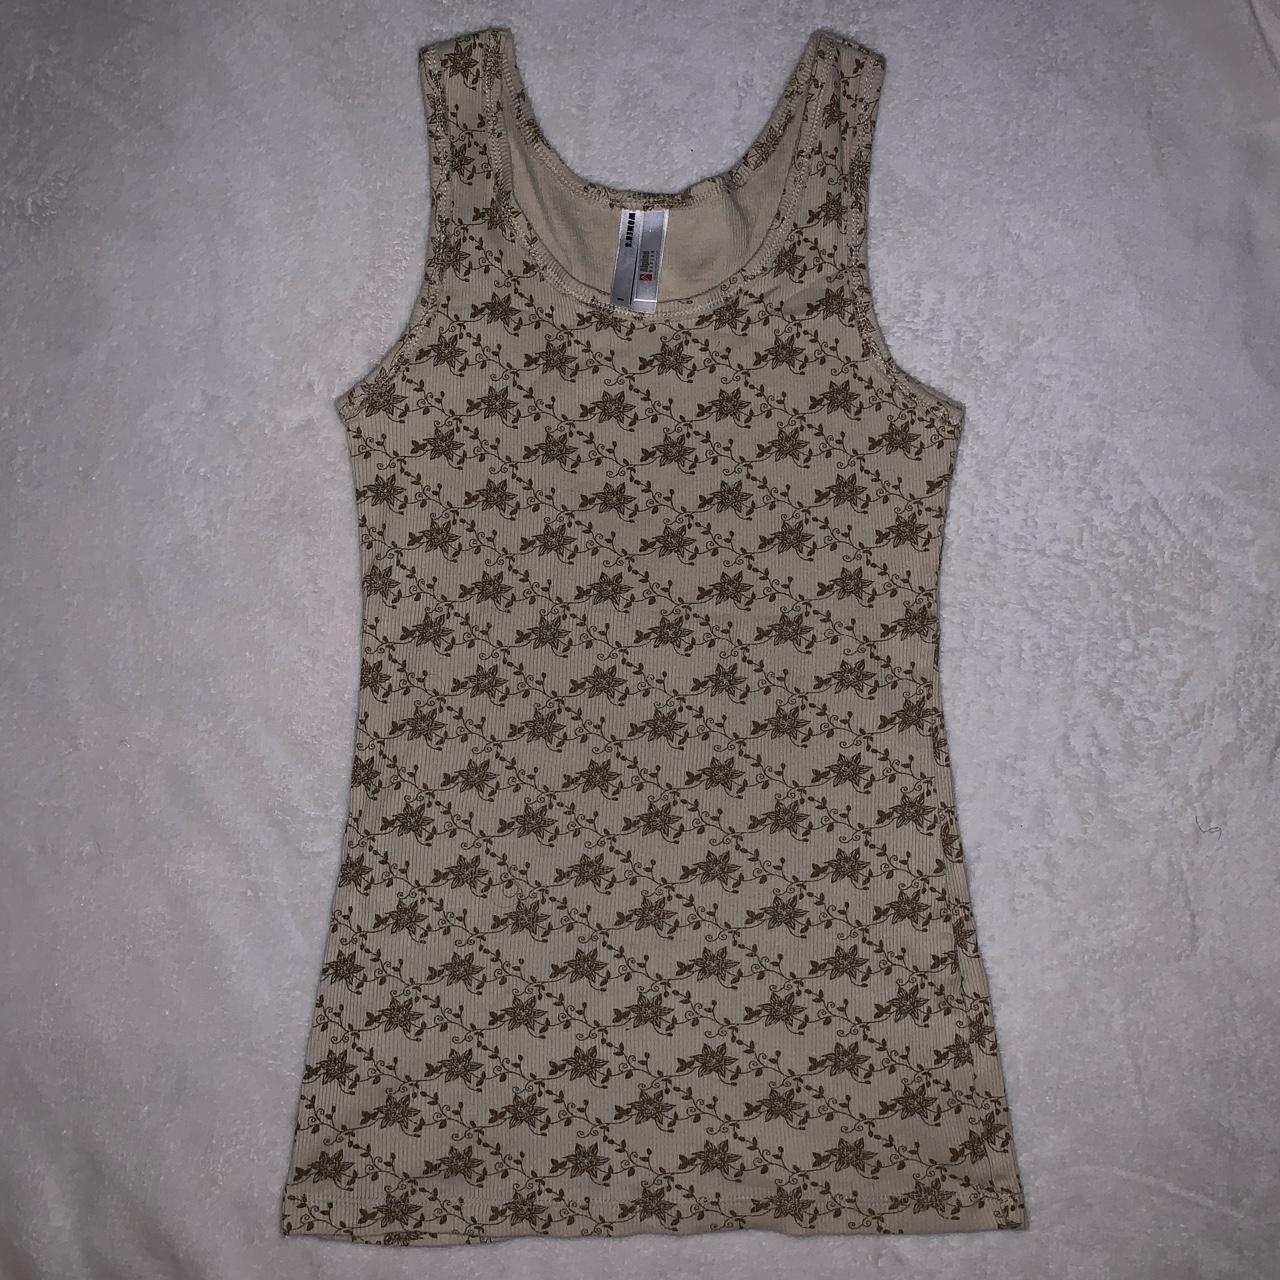 Brown and beige floral tank top -shipping is... - Depop